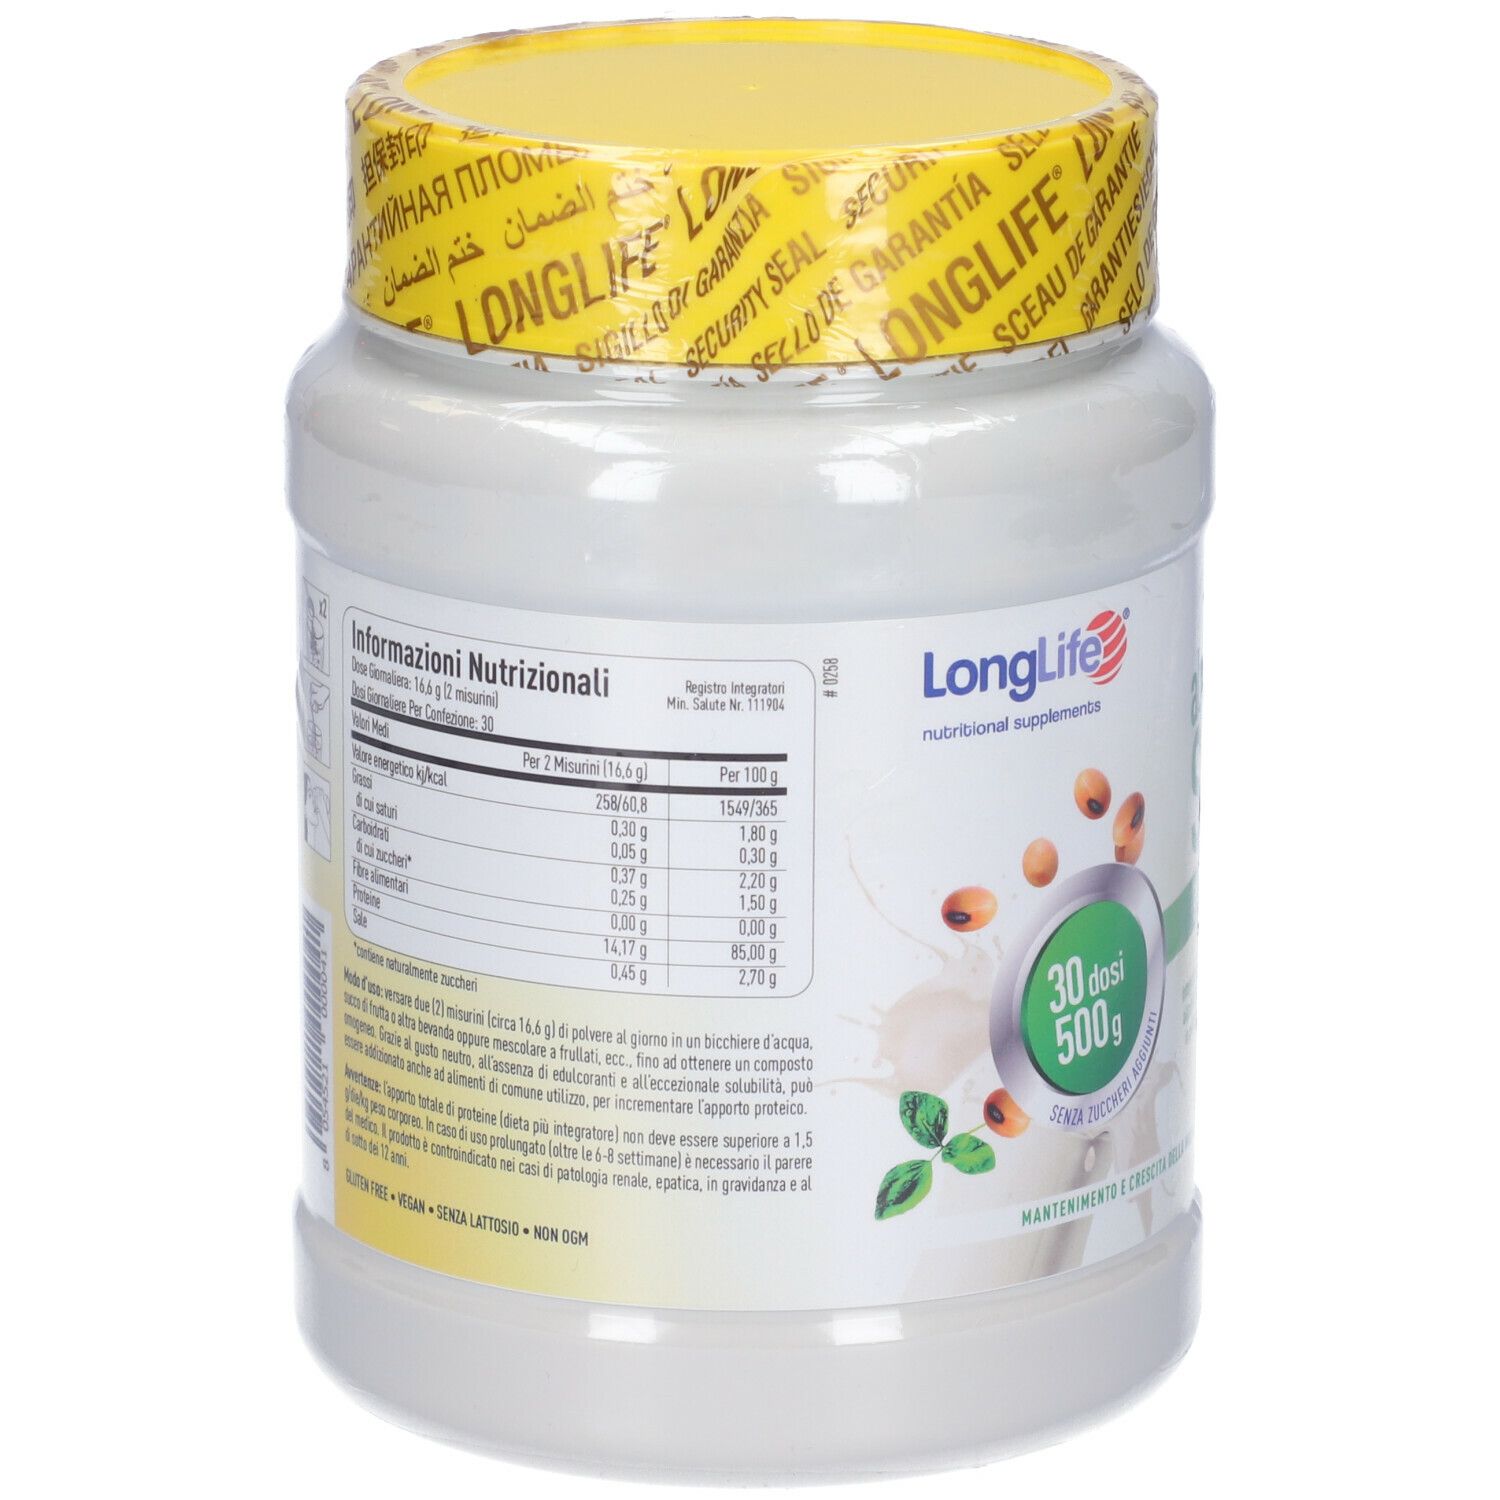 Longlife Absolute Soy 500G